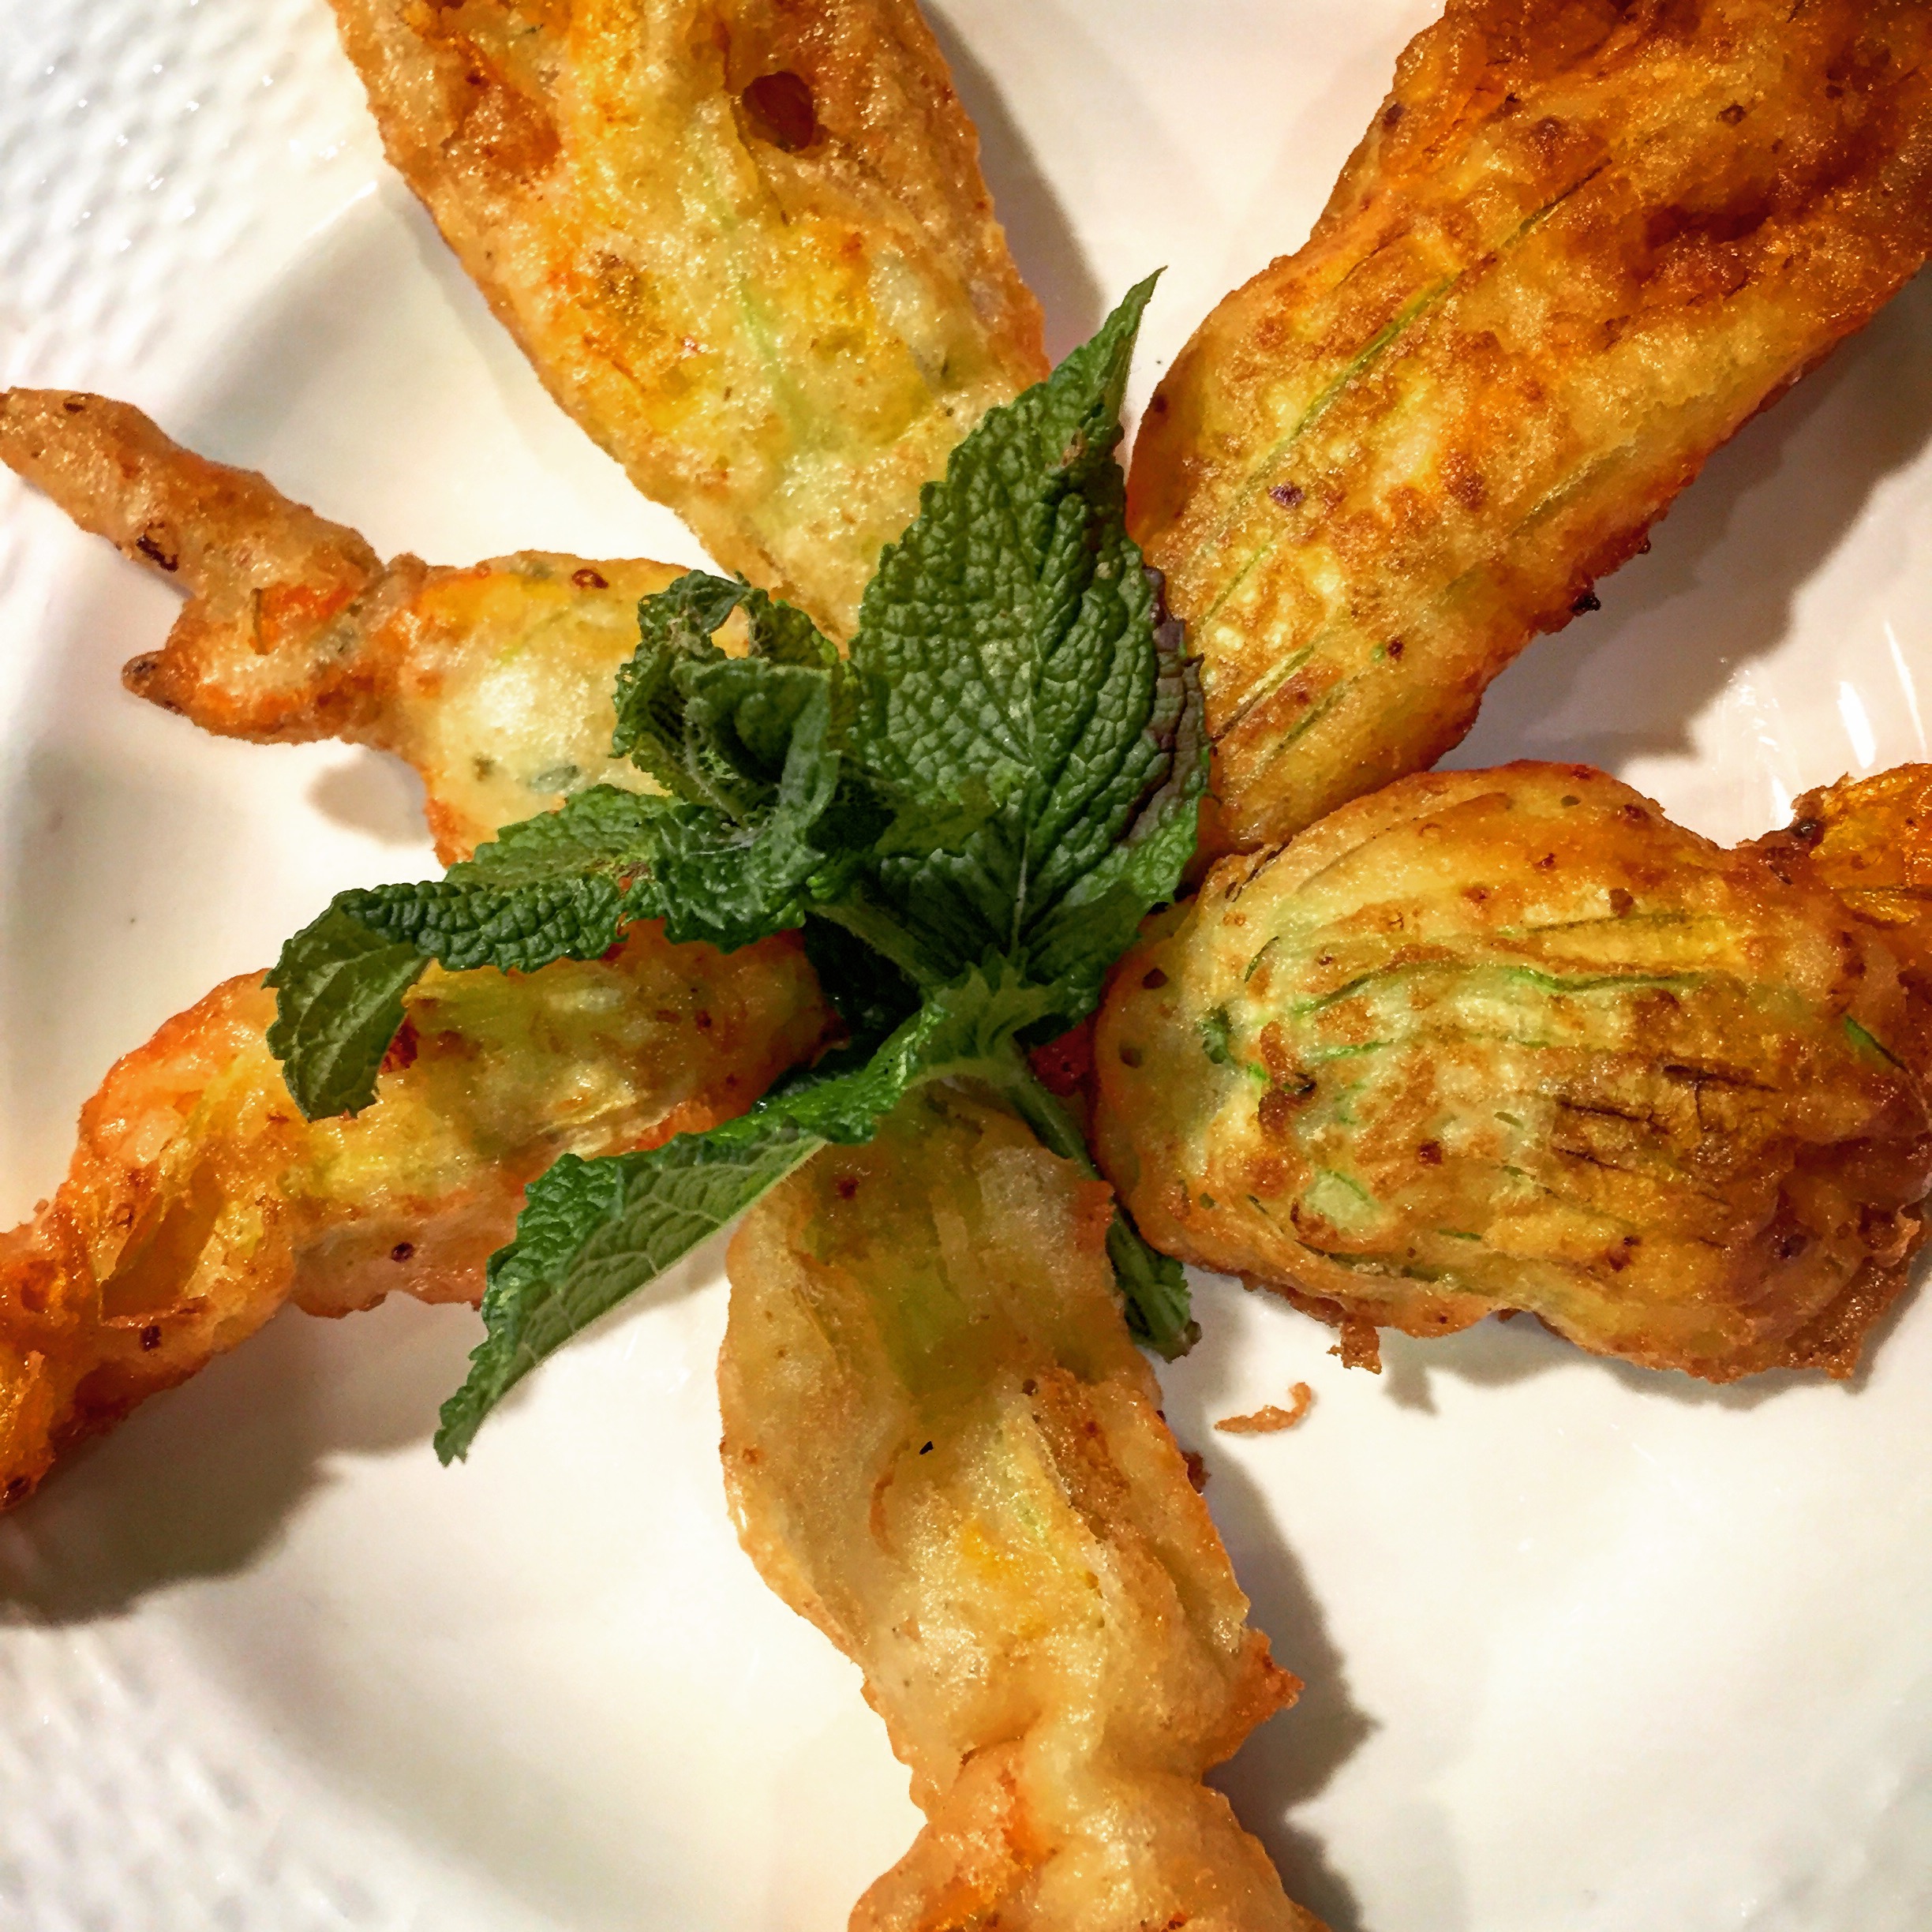 Stuffed Squash Blossoms-Cotija Cheese and Mint, Pan Fried.